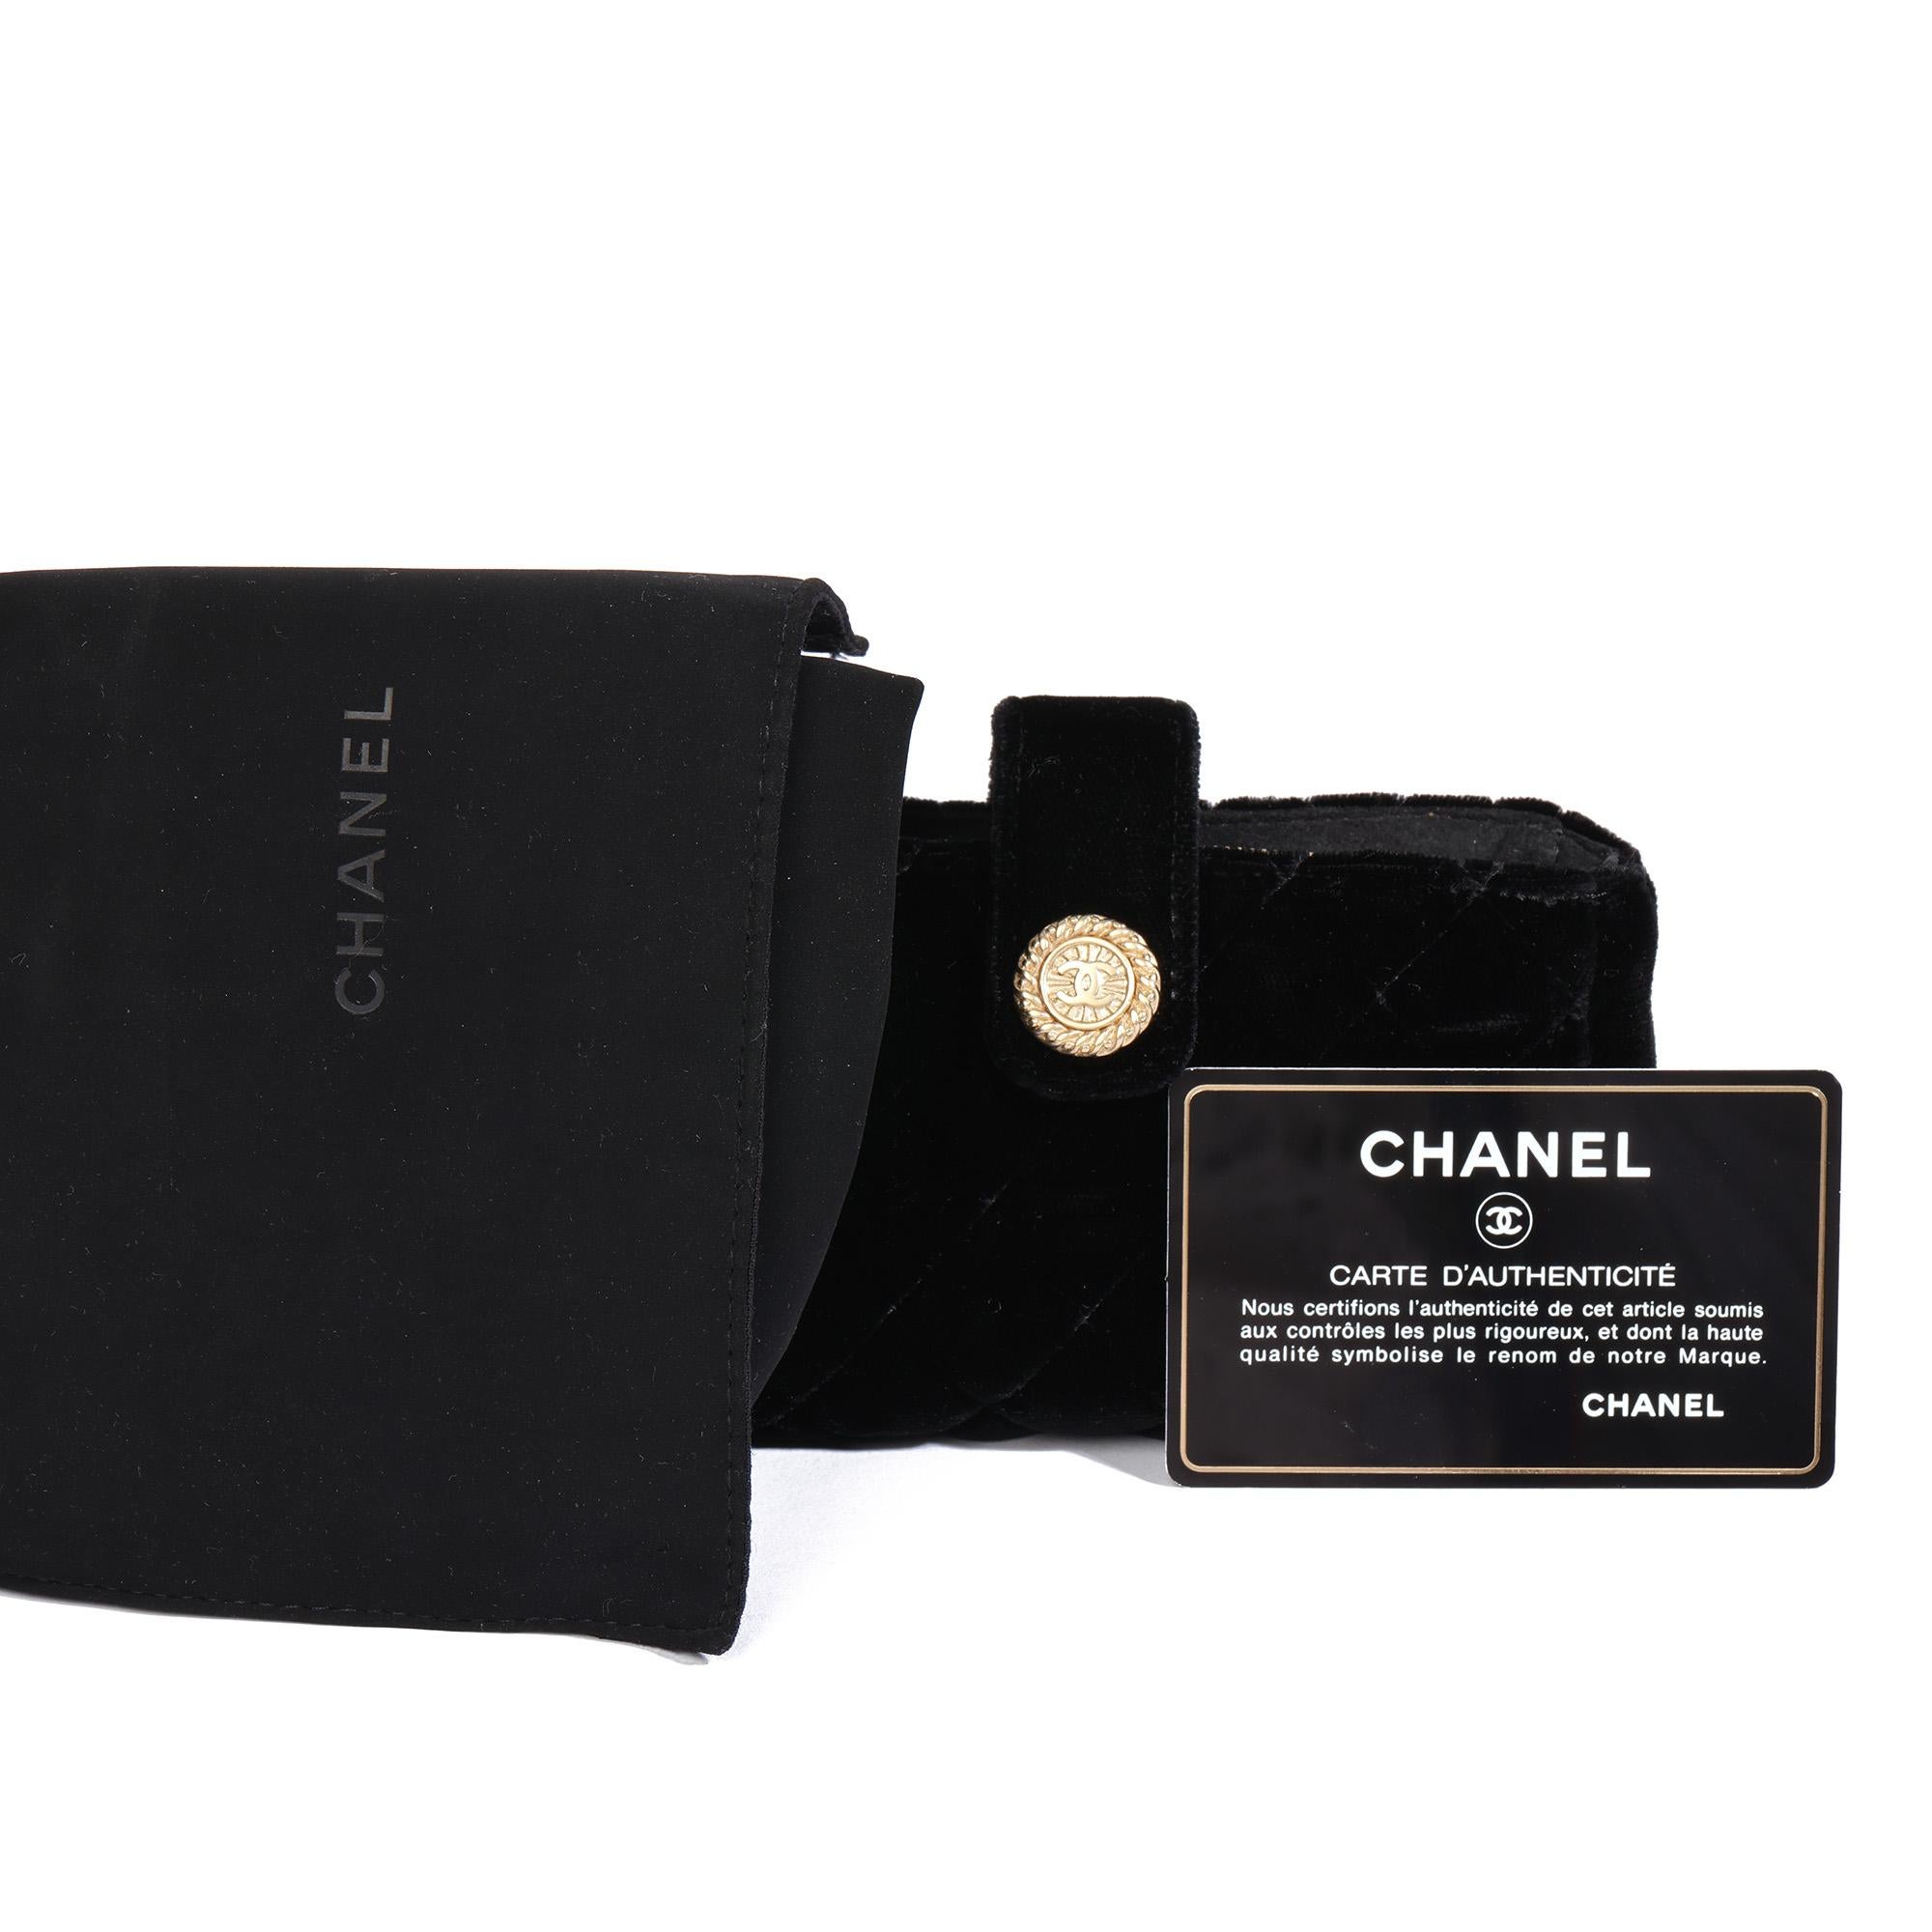 Chanel BLACK QUILTED VELVET LEATHER MINI POUCH 2